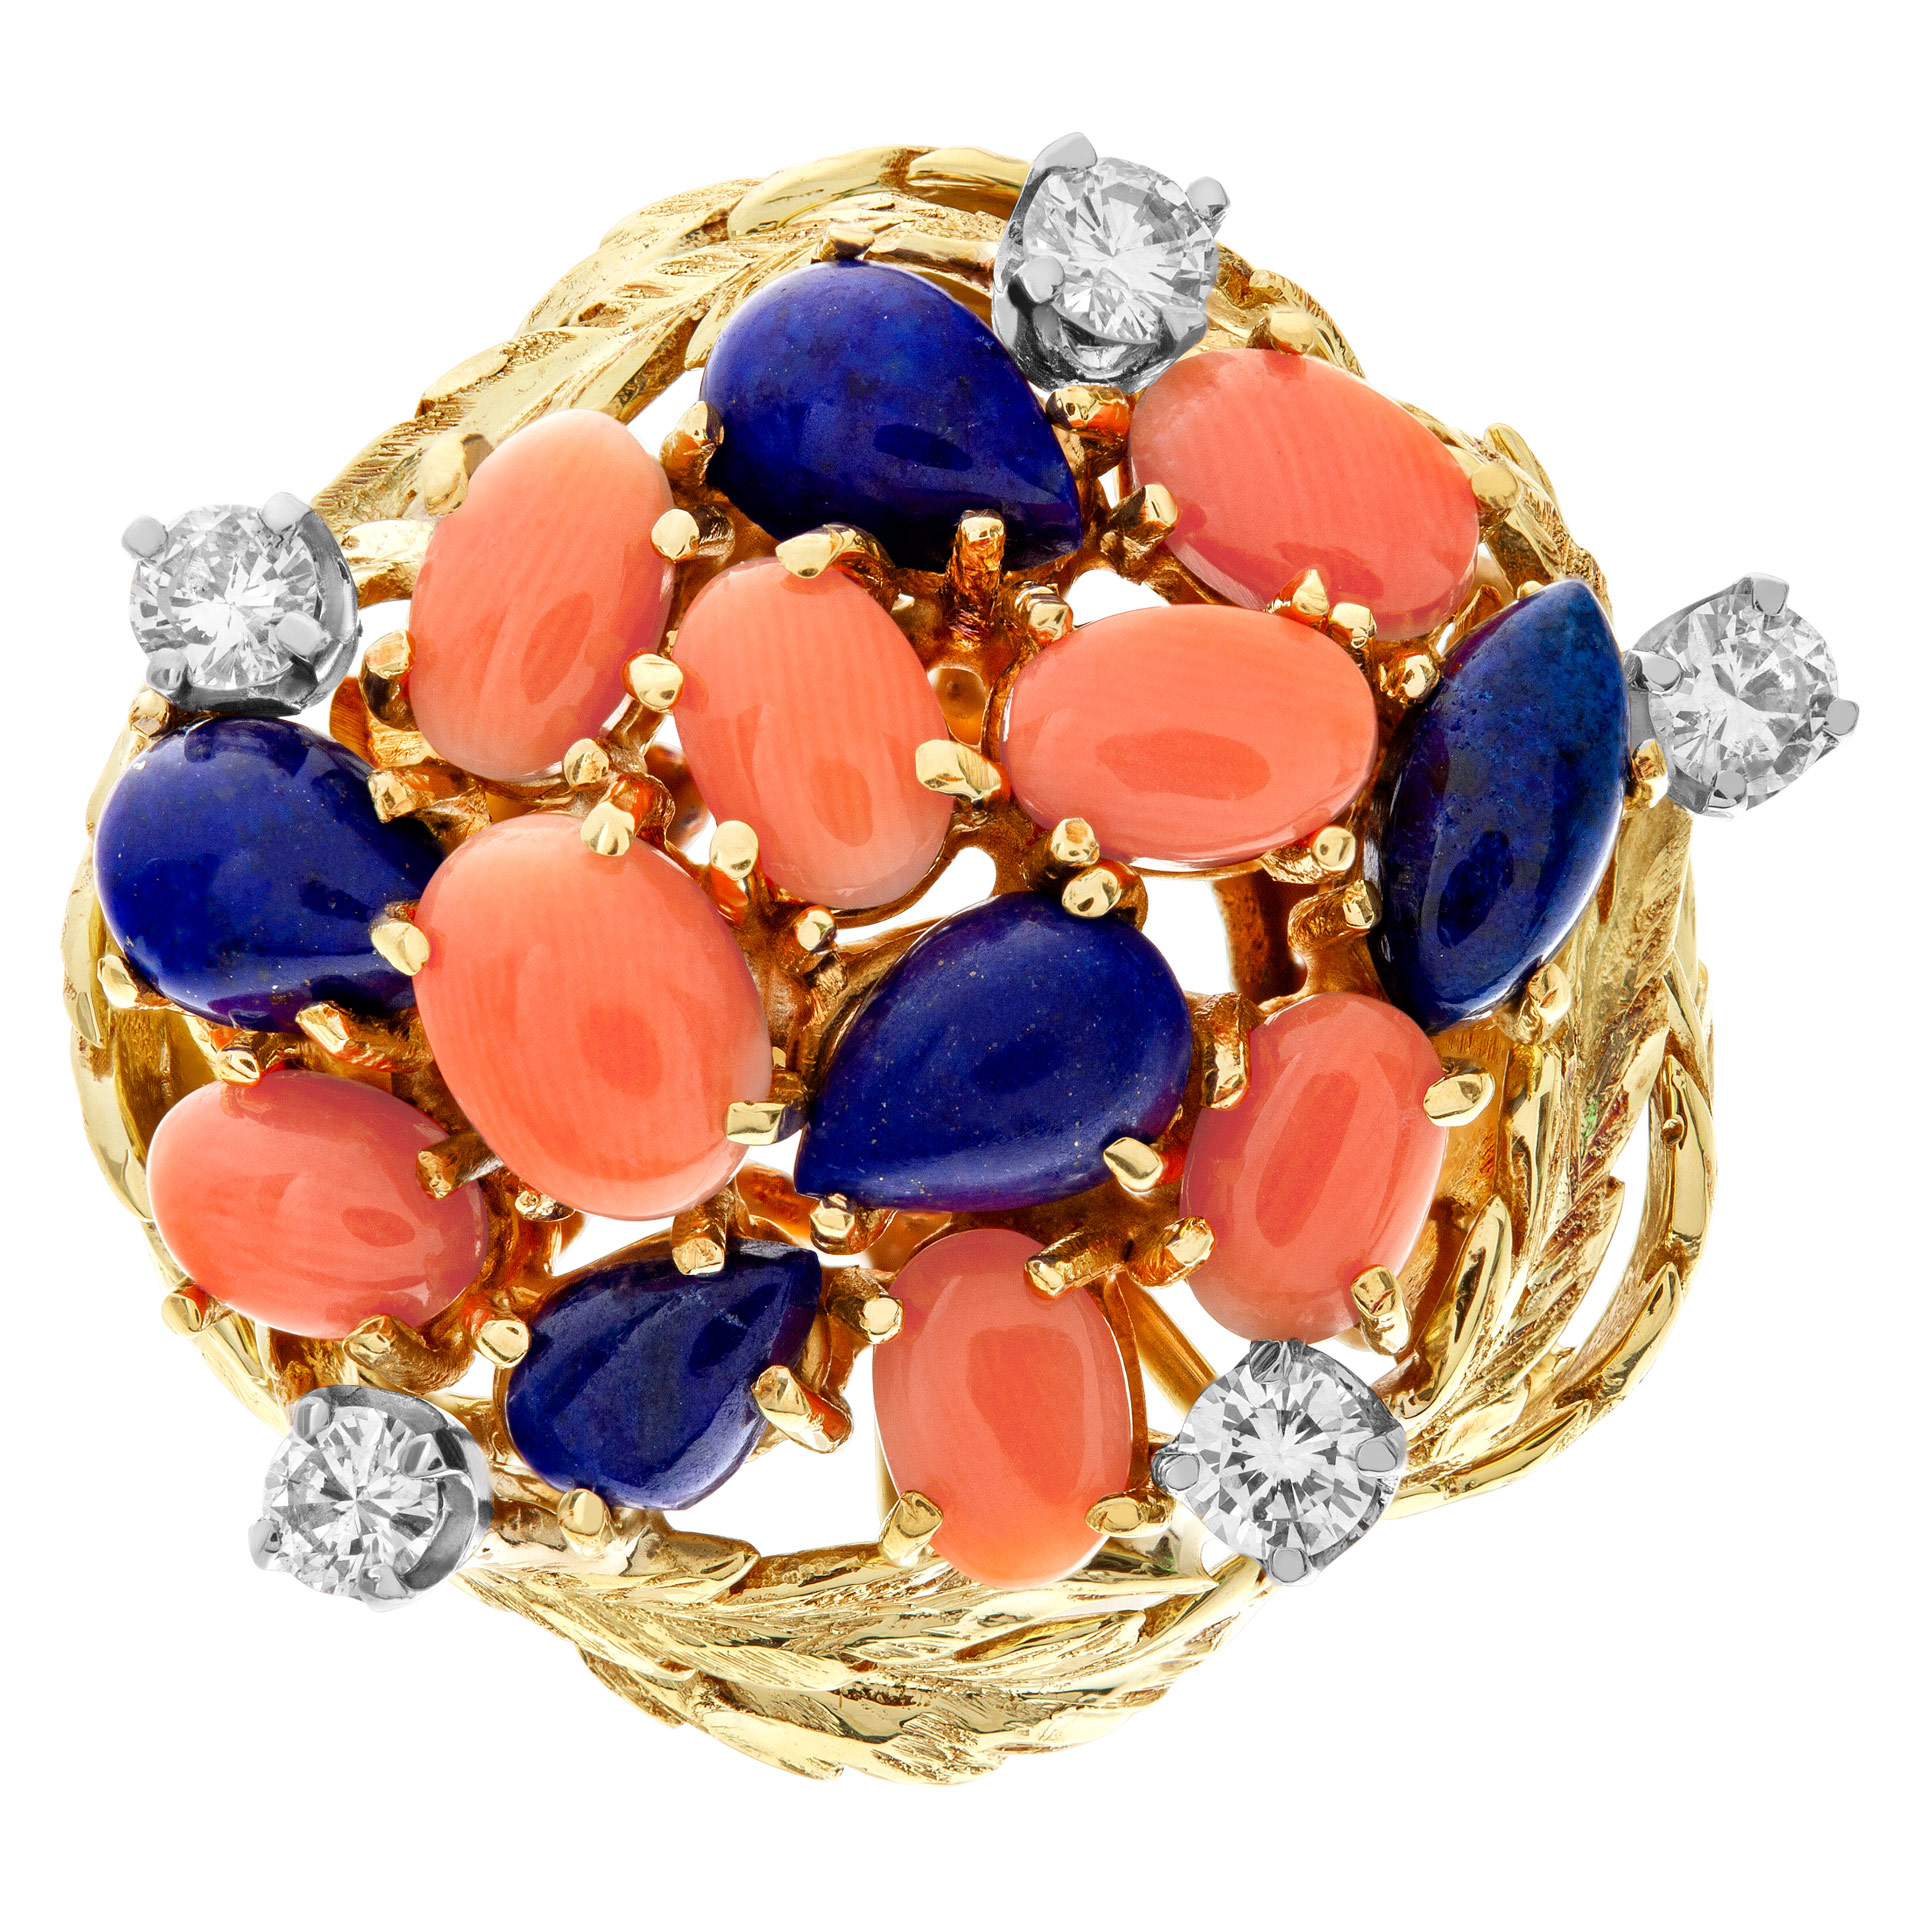 Lapiz lazuli & coral garden ring in 18k yellow gold with diamond accents image 1